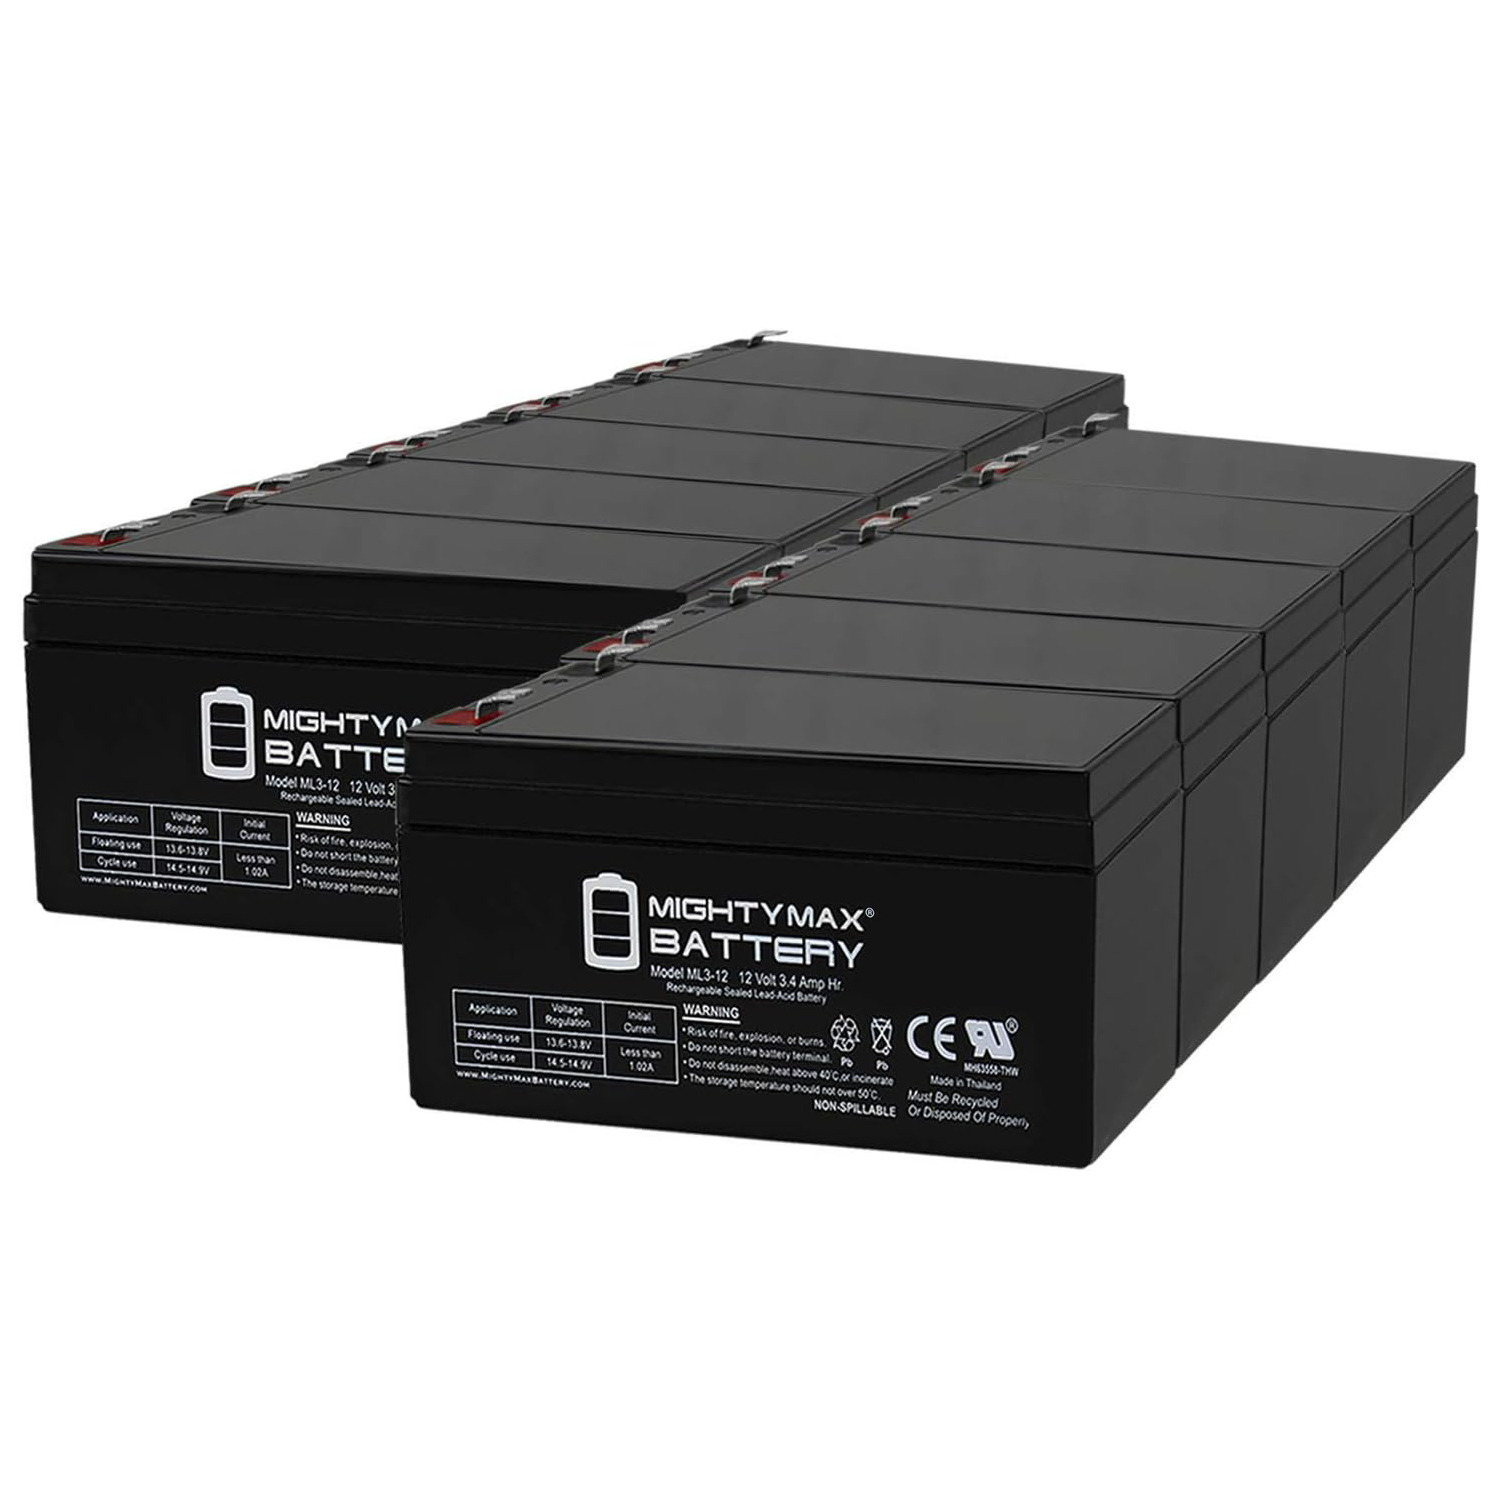 12V 3AH SLA Replacement Battery for Arthocome Console Amsco - 10 Pack